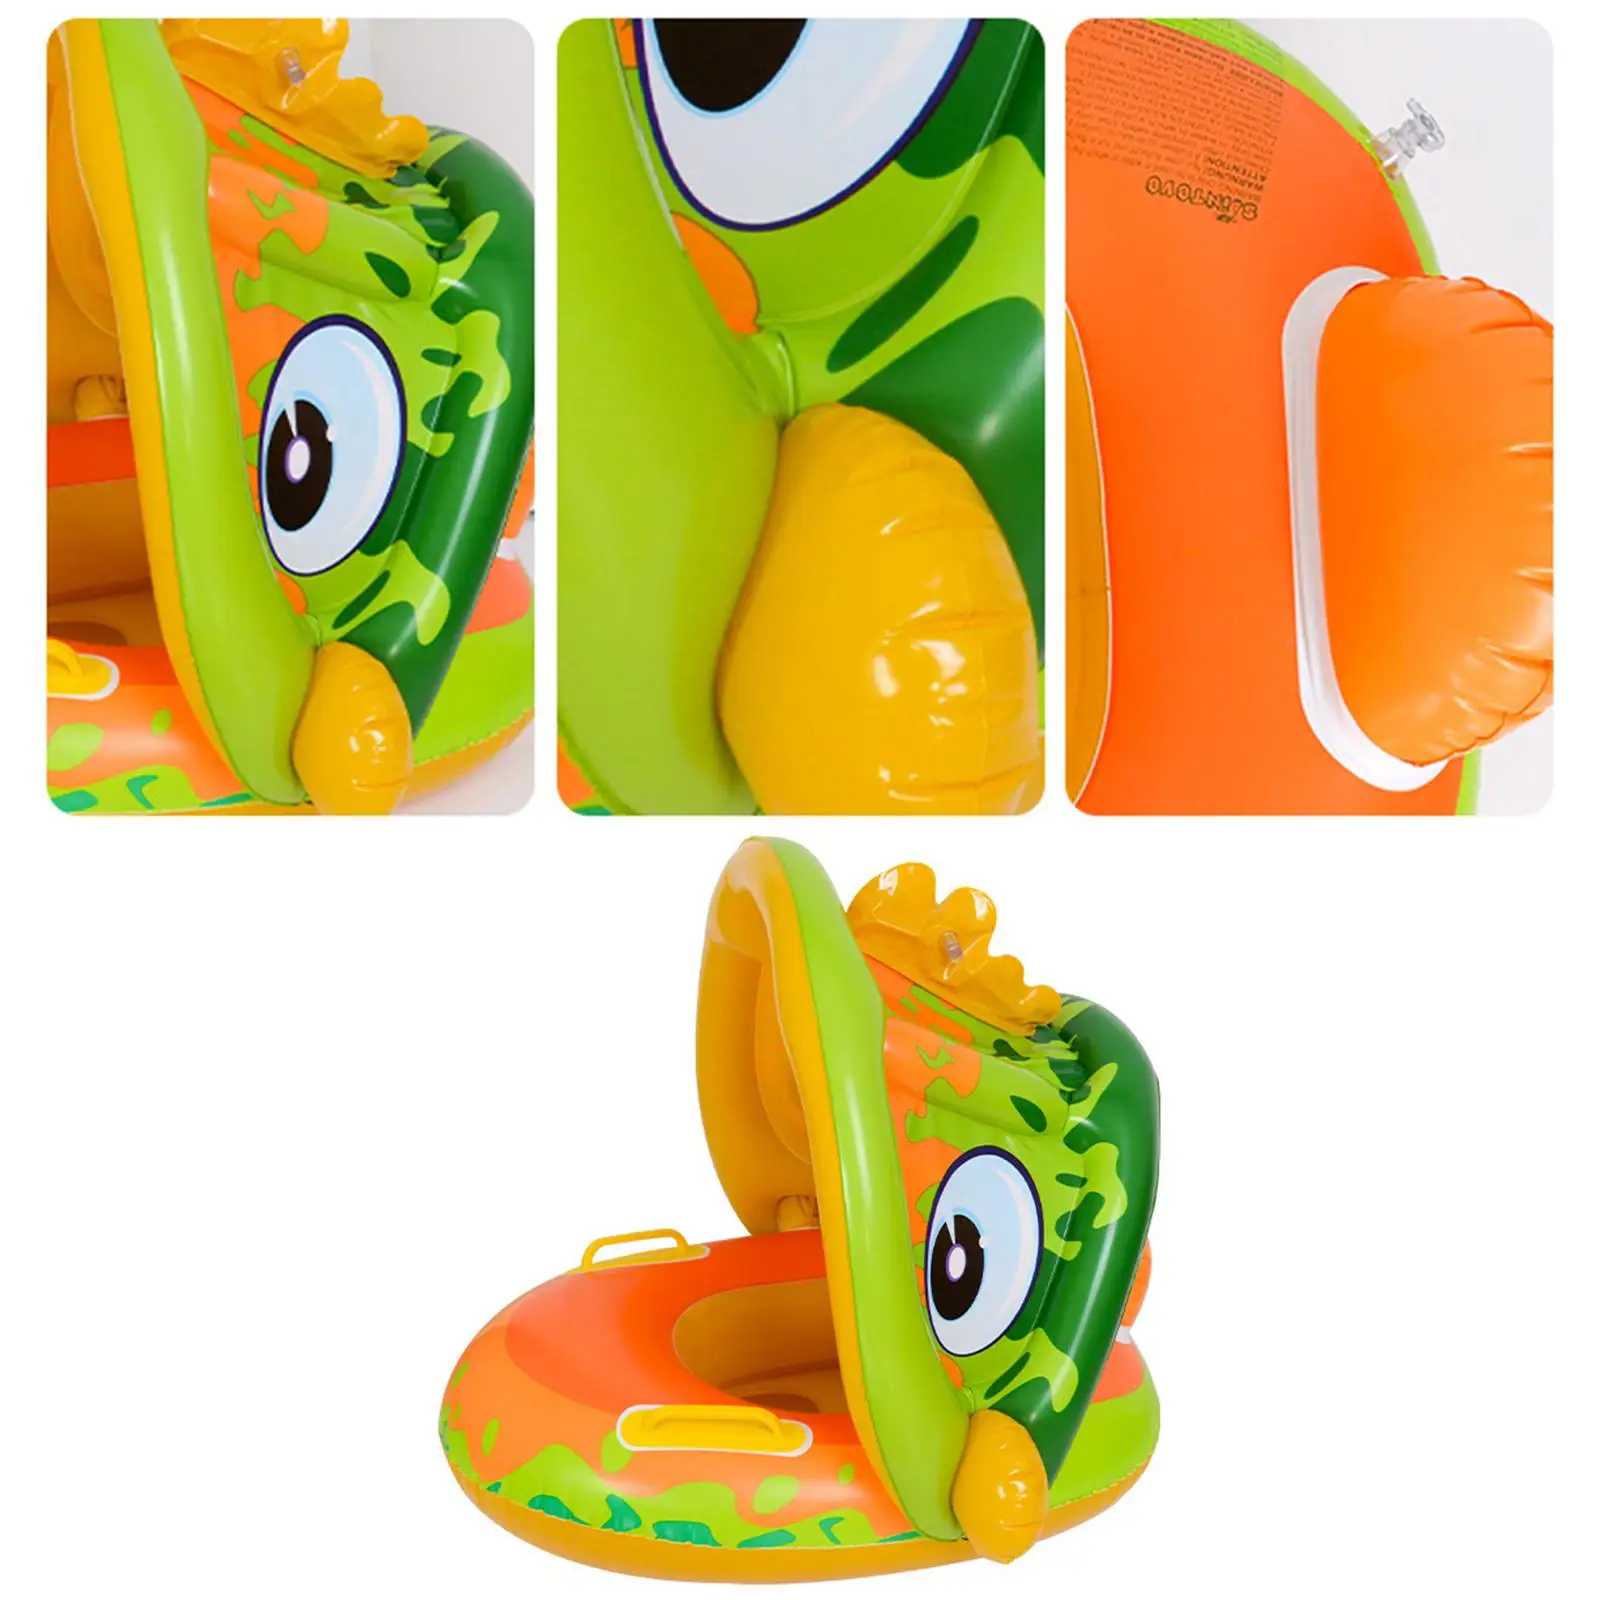 Dinosaur Float Seat Toy Baby Infant Pool with Canopy Aid Portable Children Toddlers